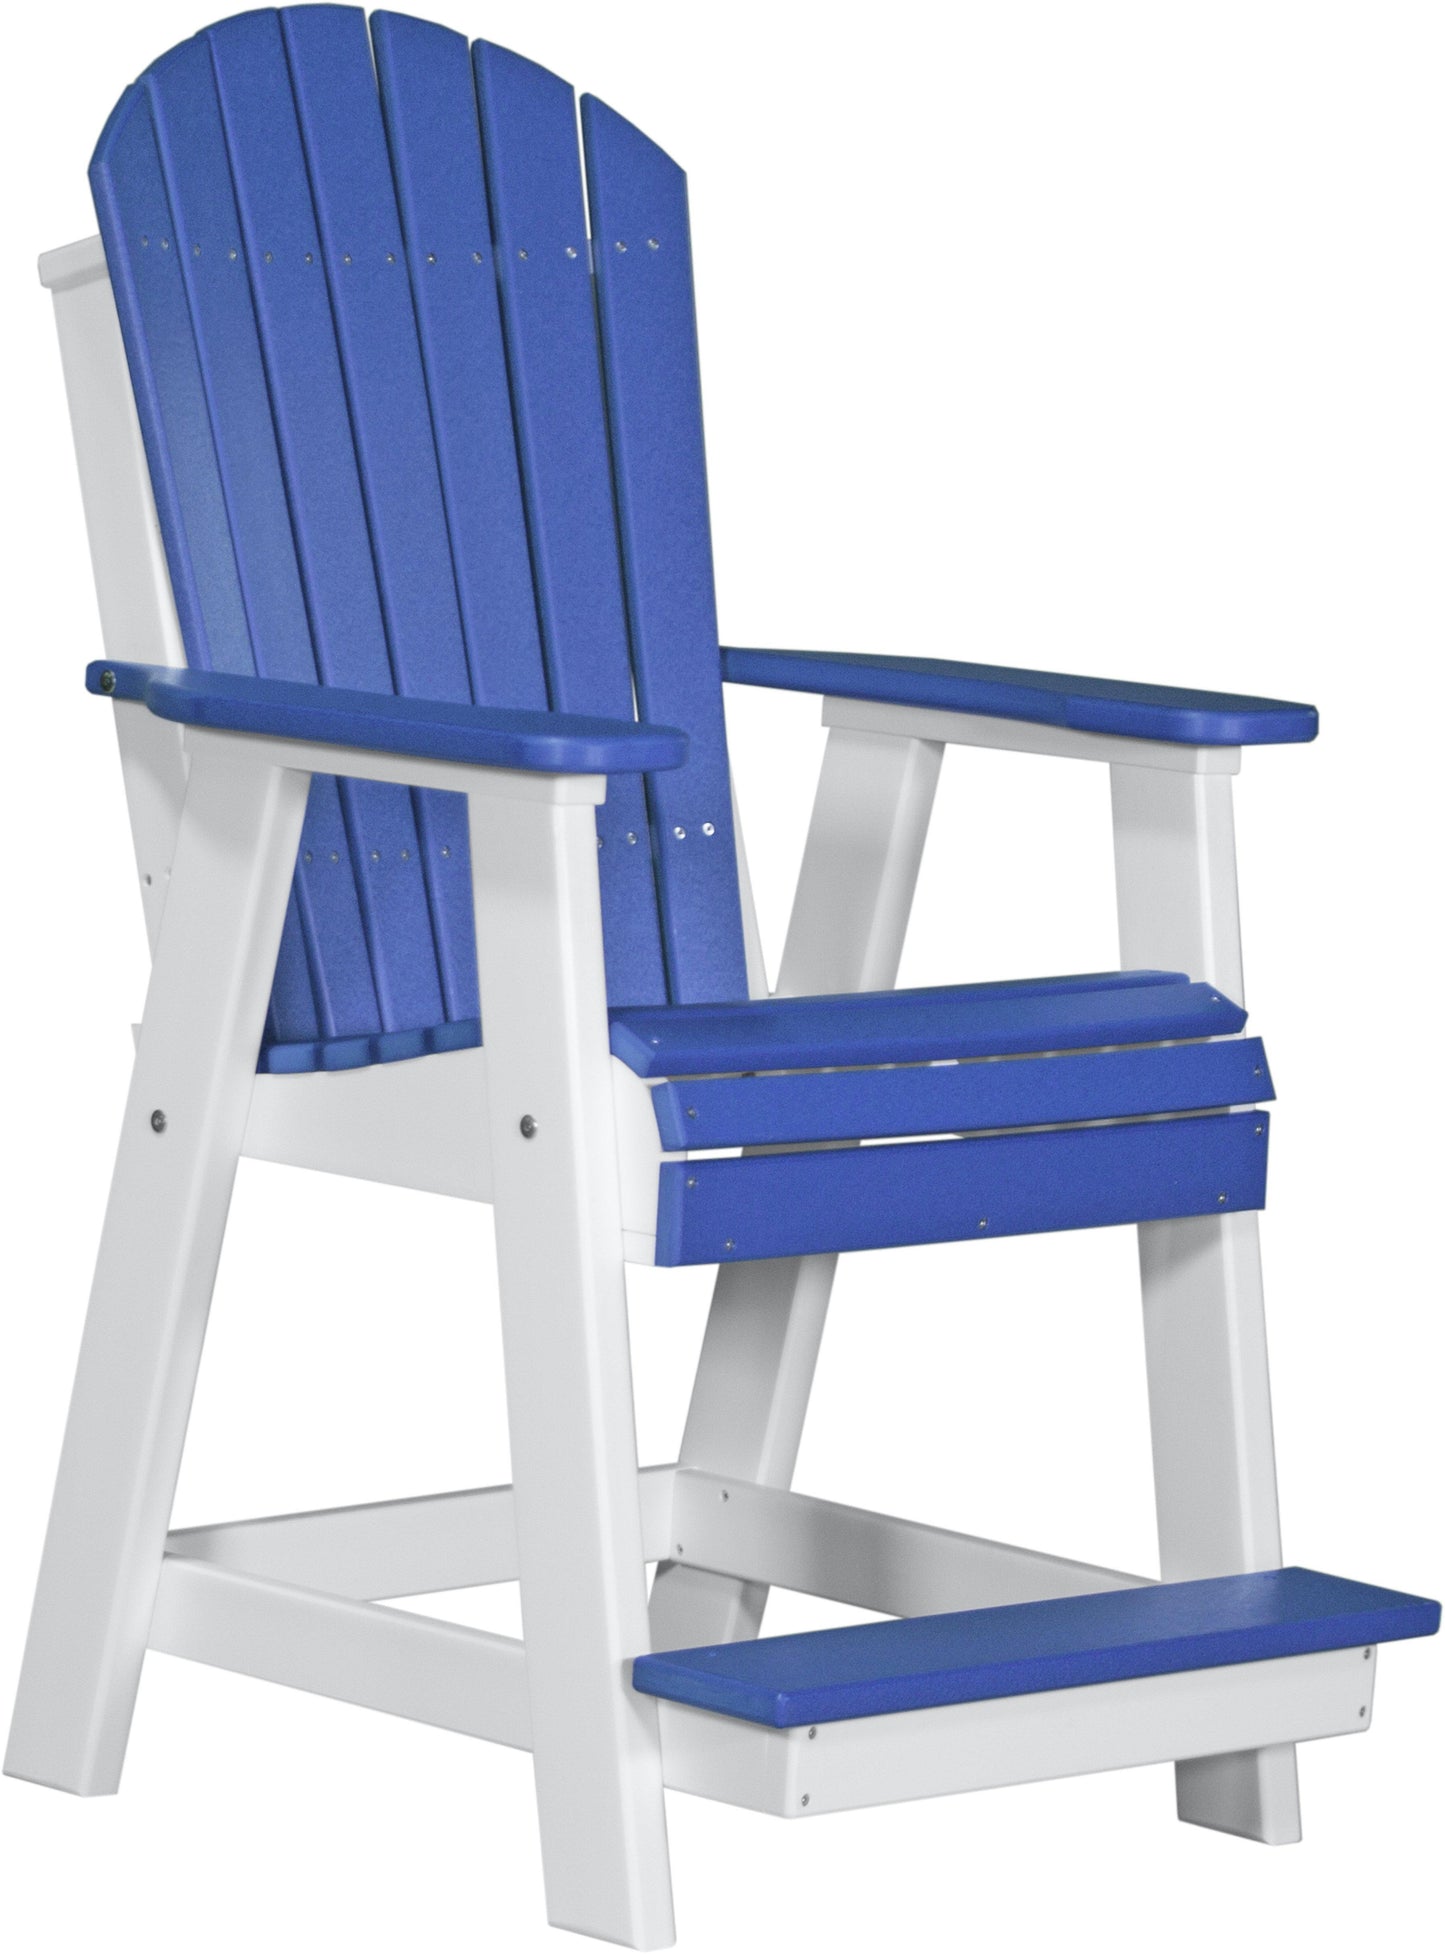 luxcraft counter height recycled plastic adirondack balcony chair blue on white